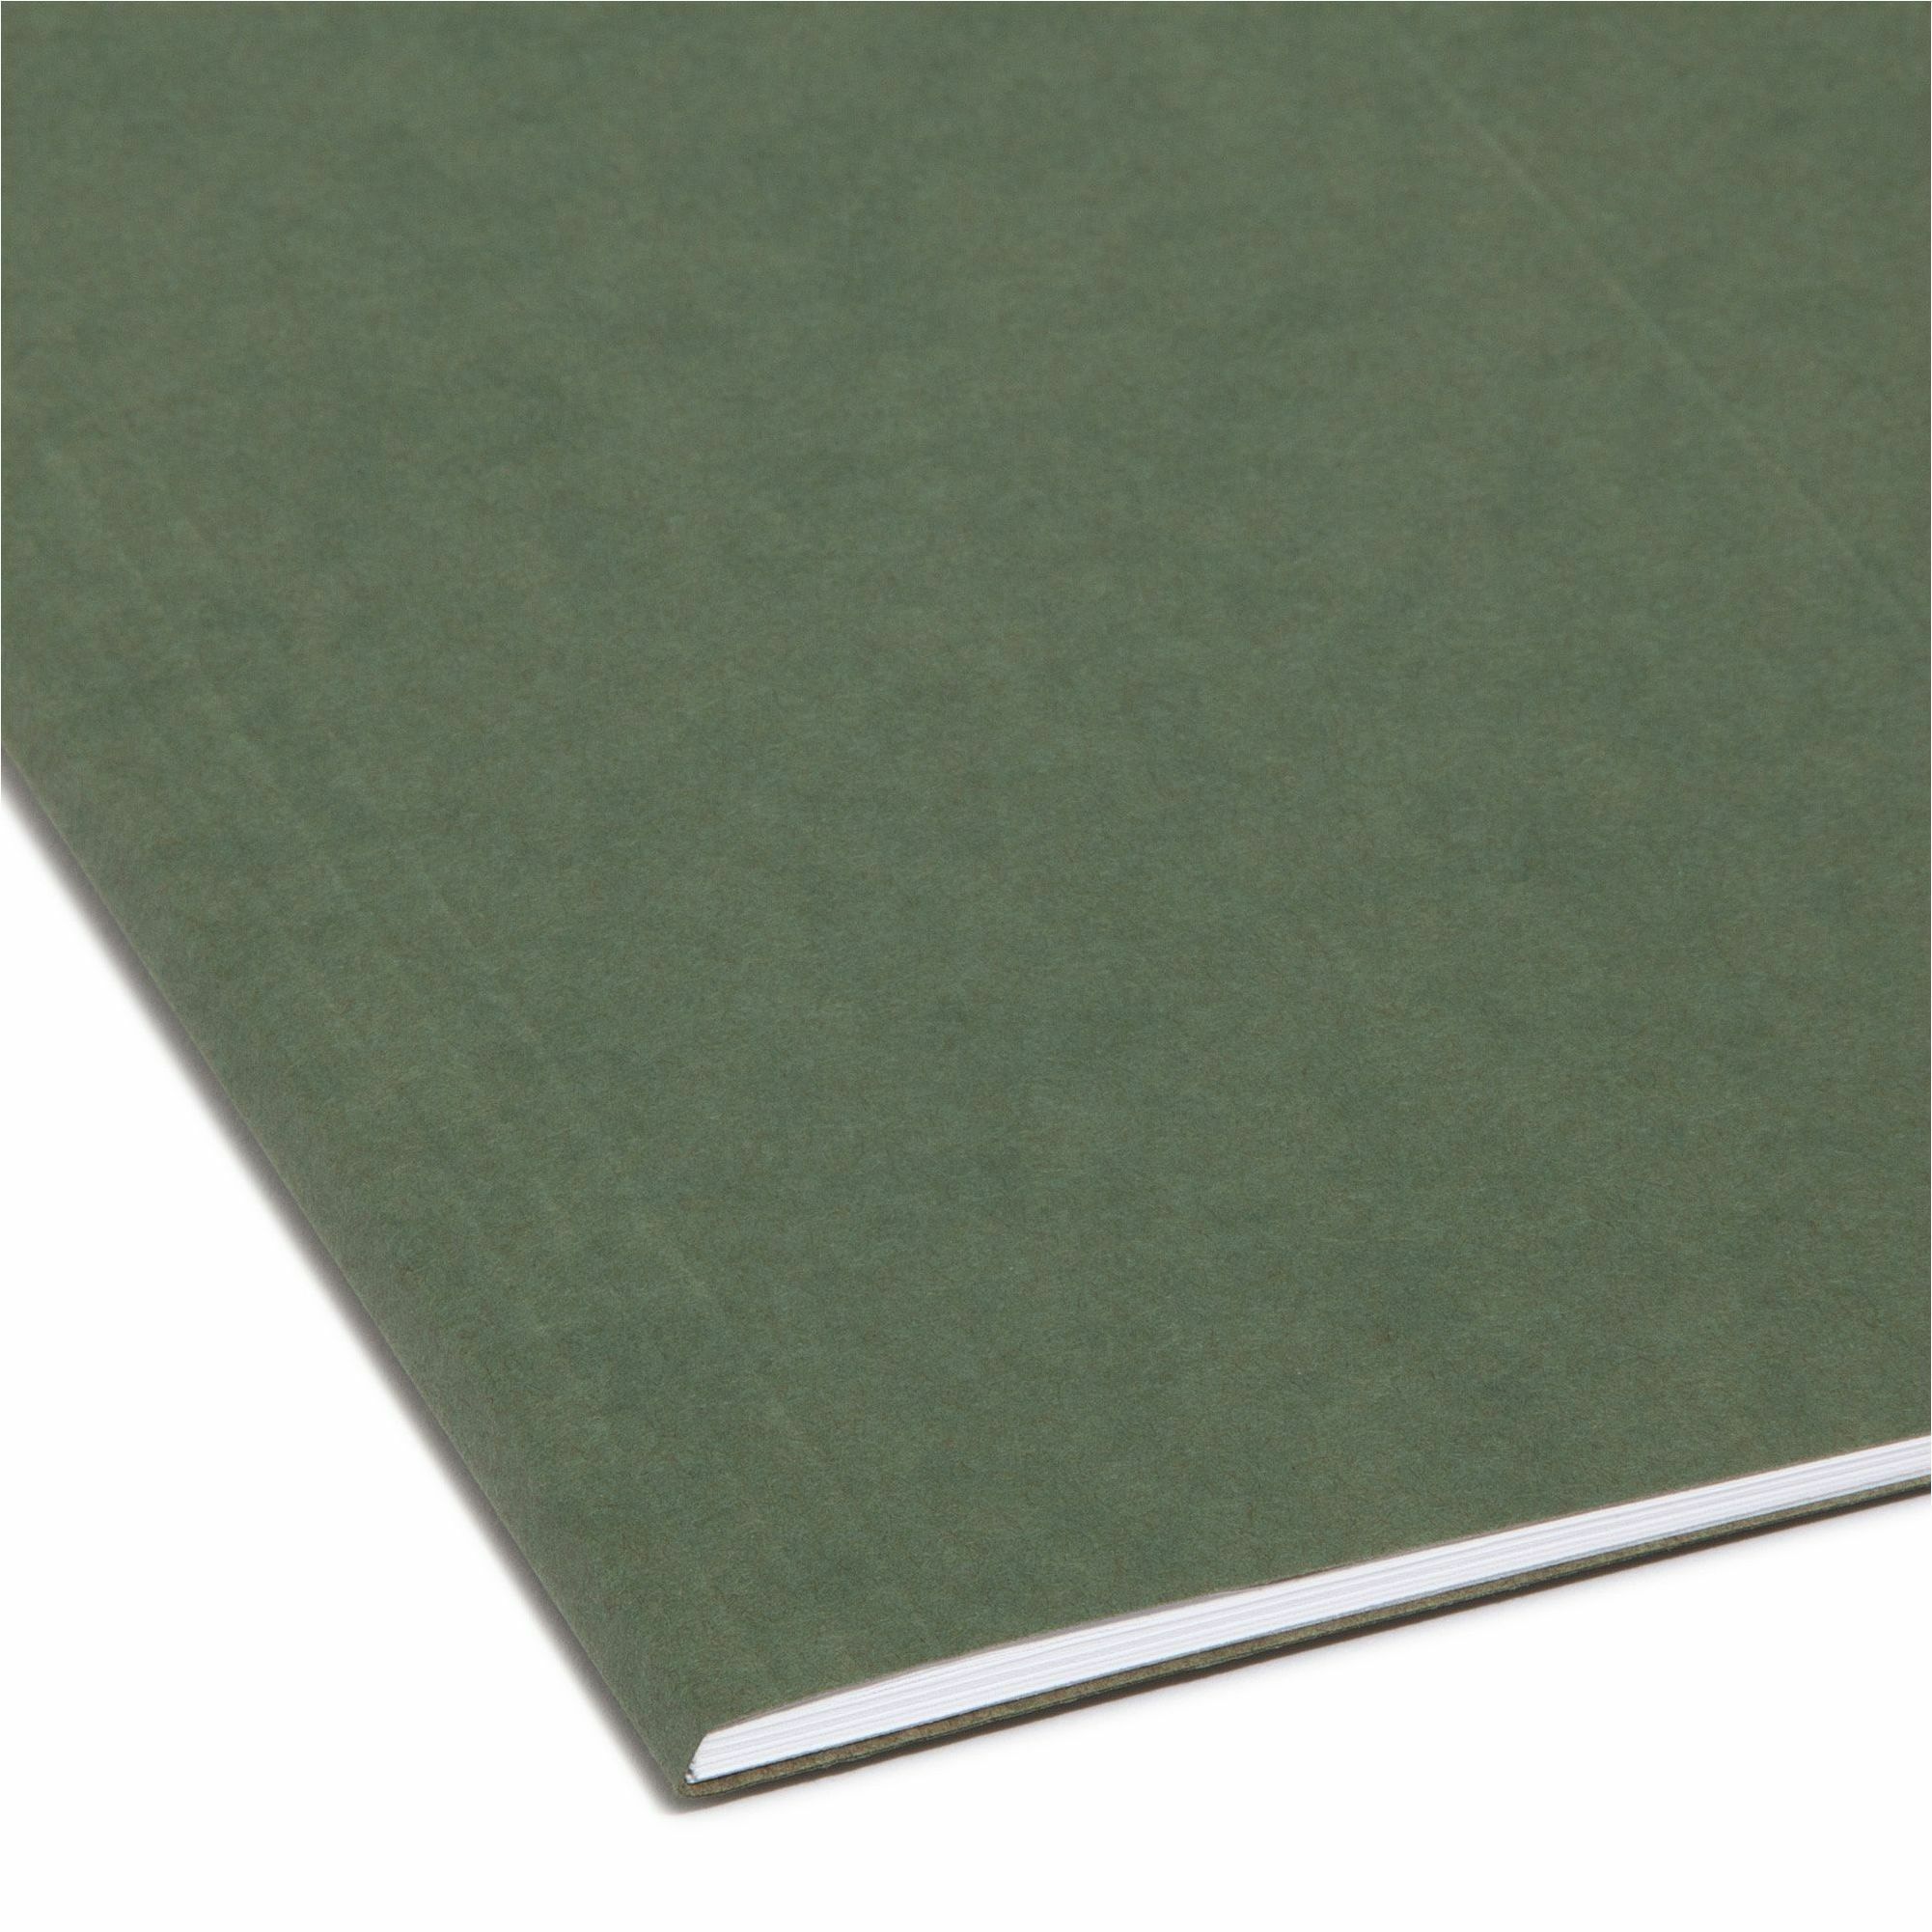 1/5-Cut Adjustable Tab Smead Hanging File Folder with Tab 25 per Box 64055 Standard Green Letter Size 